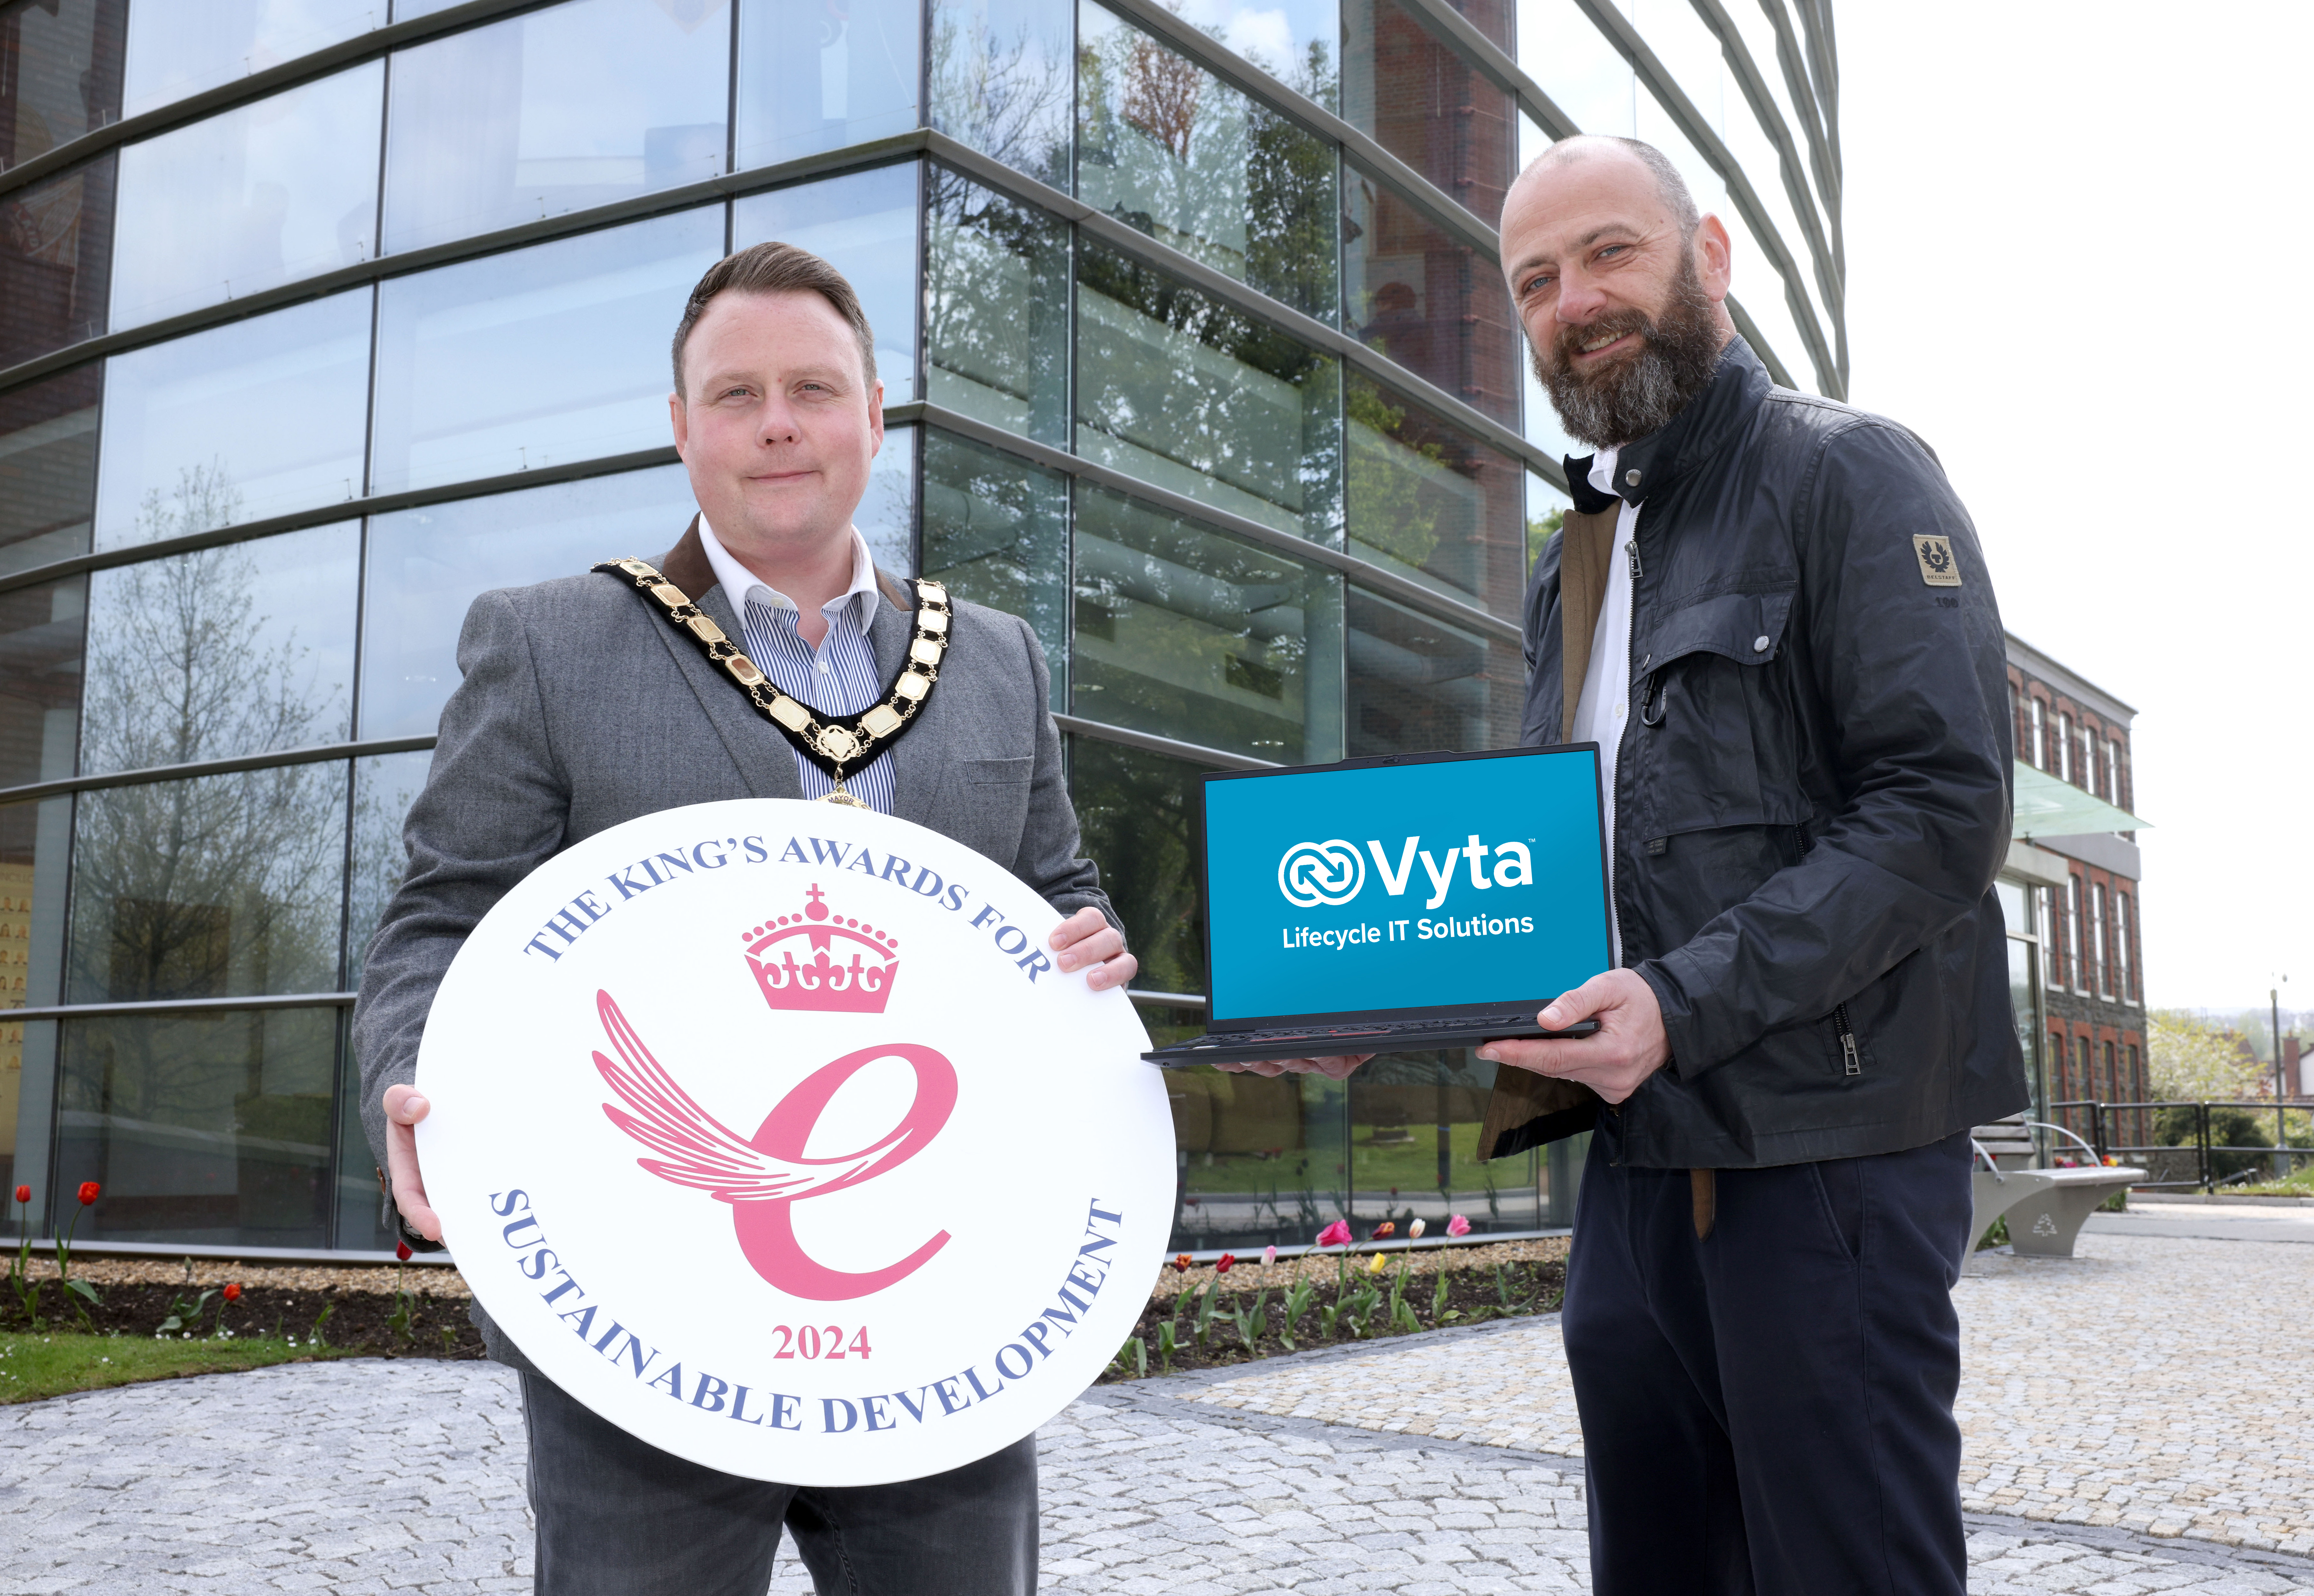 PRESS PIC VYTA RECEIVES HIGHEST BUSINESS HONOUR AS ONE OF FOUR NI COMPANIES TO WIN A KINGS AWARD FOR ENTERPRISE IN 2024